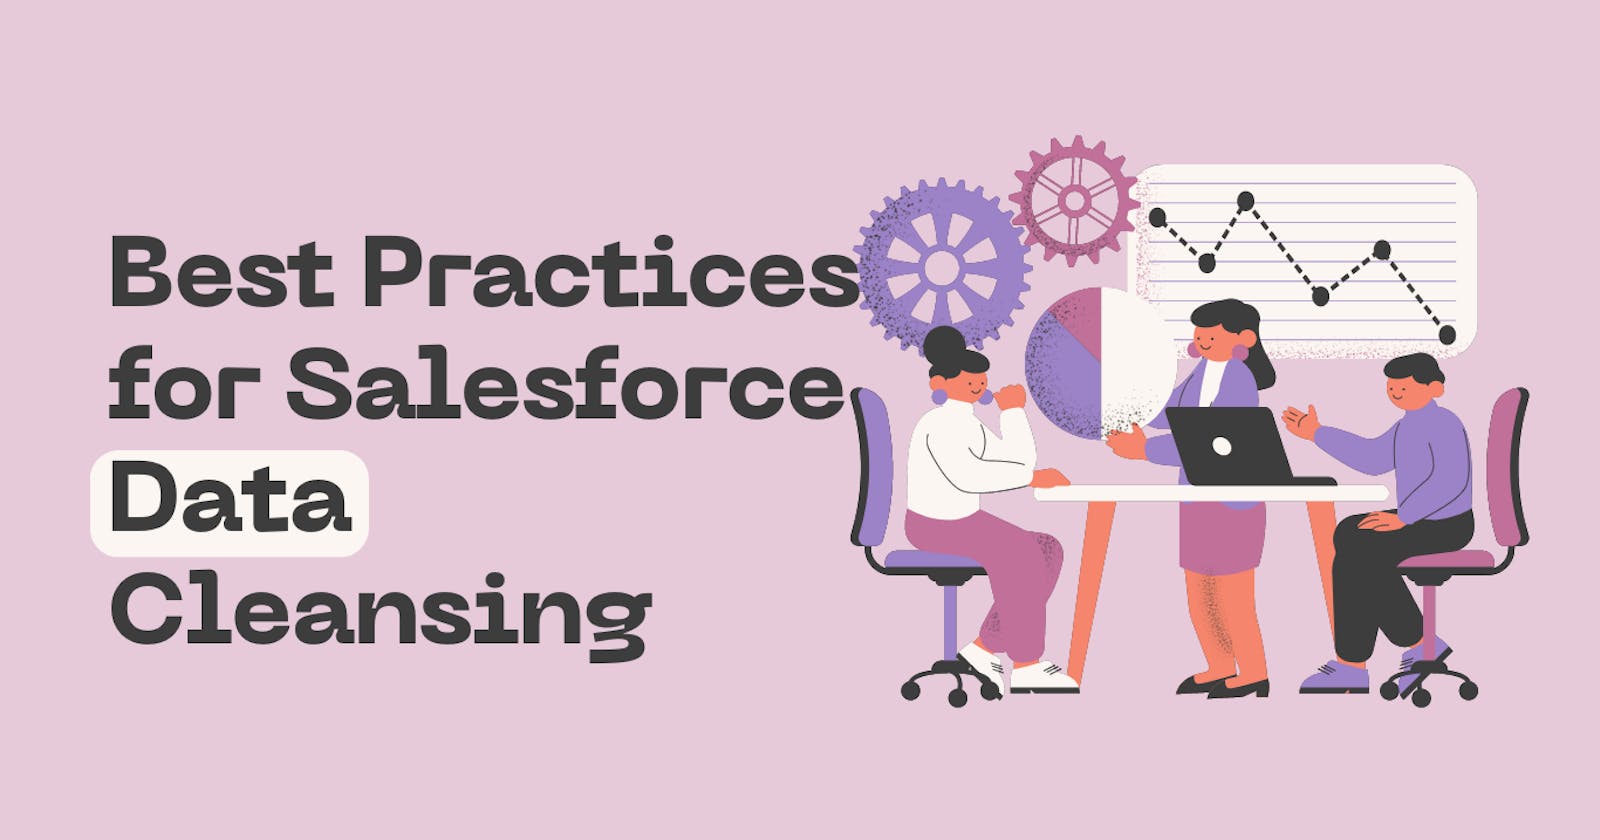 Optimizing CRM Efficiency: Best Practices for Salesforce Data Cleansing